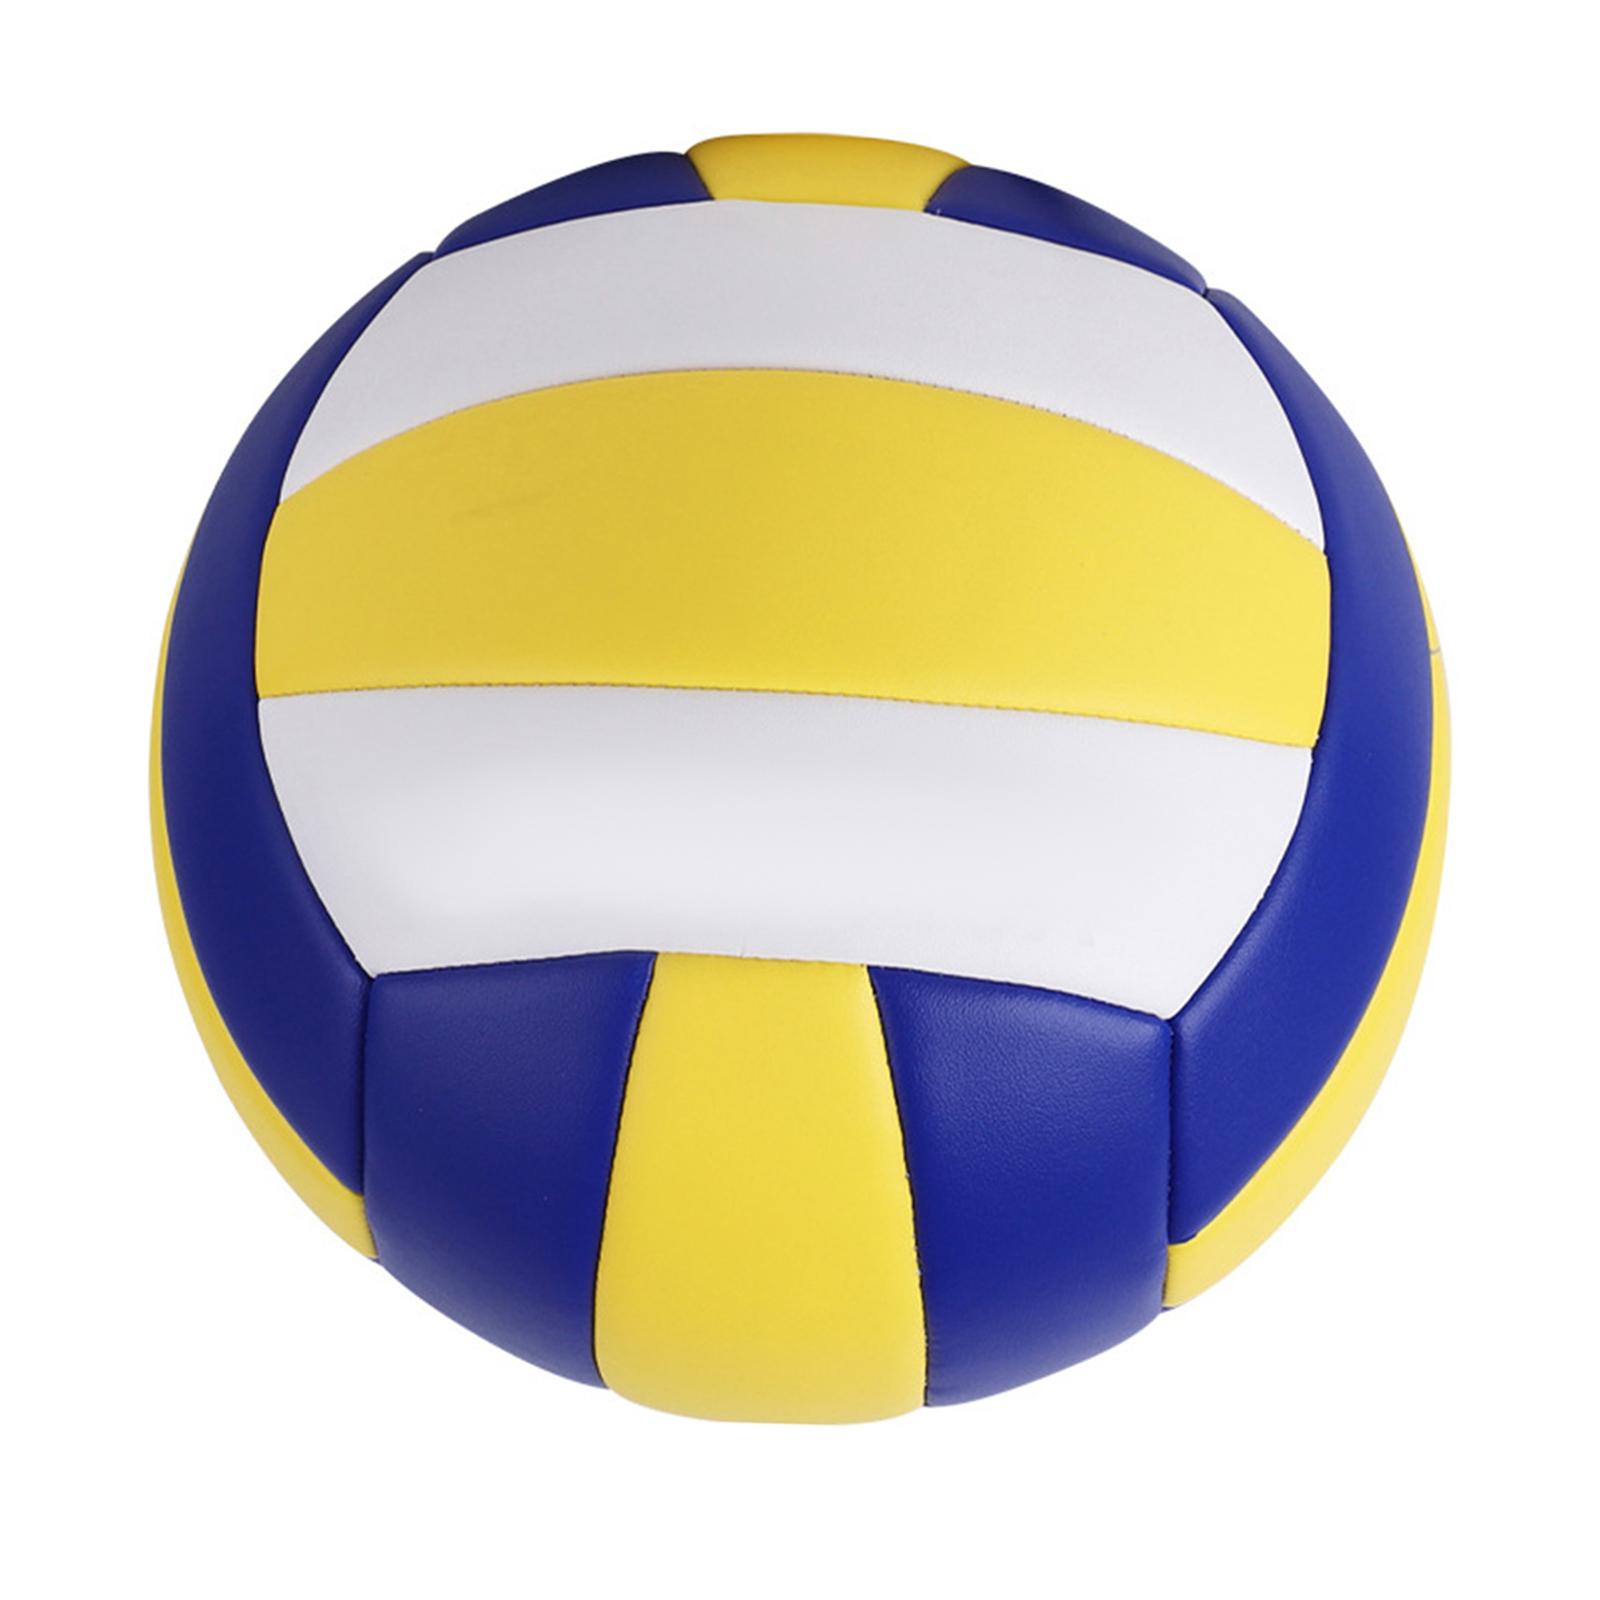 Professional Indoor Volleyball PU Leather Outdoor Ball w/ Ball Pump Beach Gym Training play children Beginner Teenager Blue Yellow - image 2 of 11